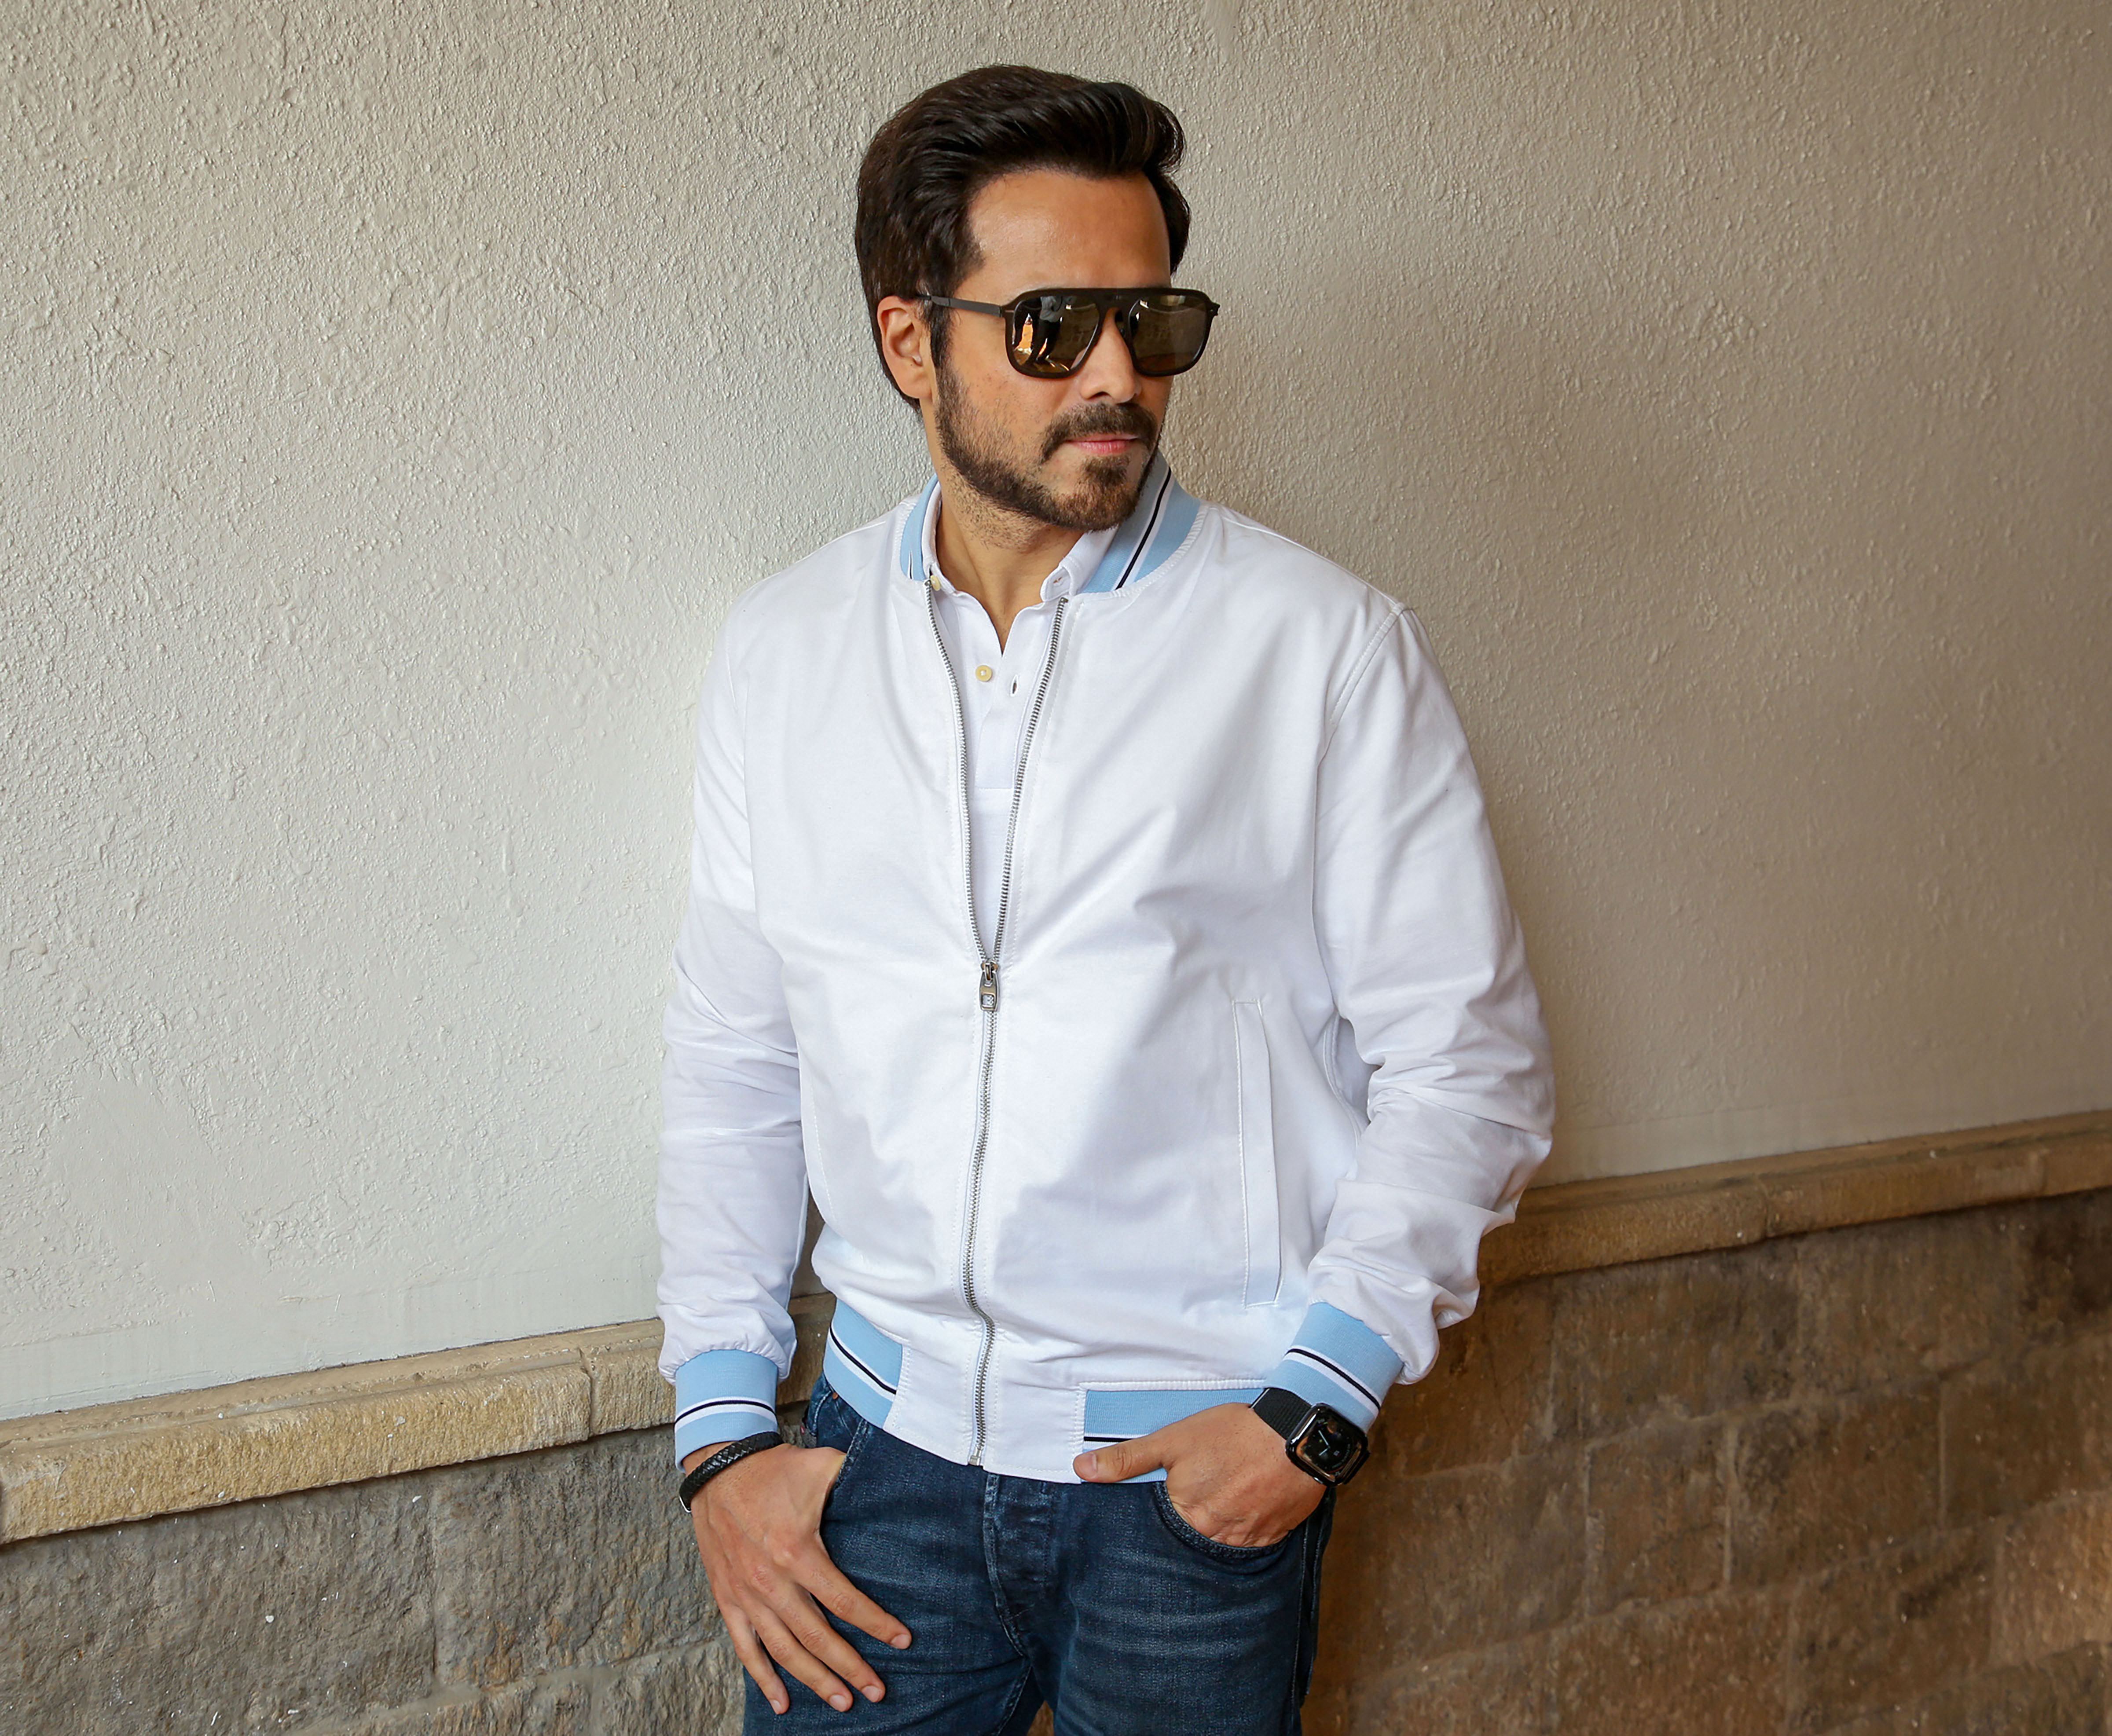 Bollywood actor Emraan Hashmi poses for a photograph during the promotion of his upcoming Hindi film 'The Body' - PTI